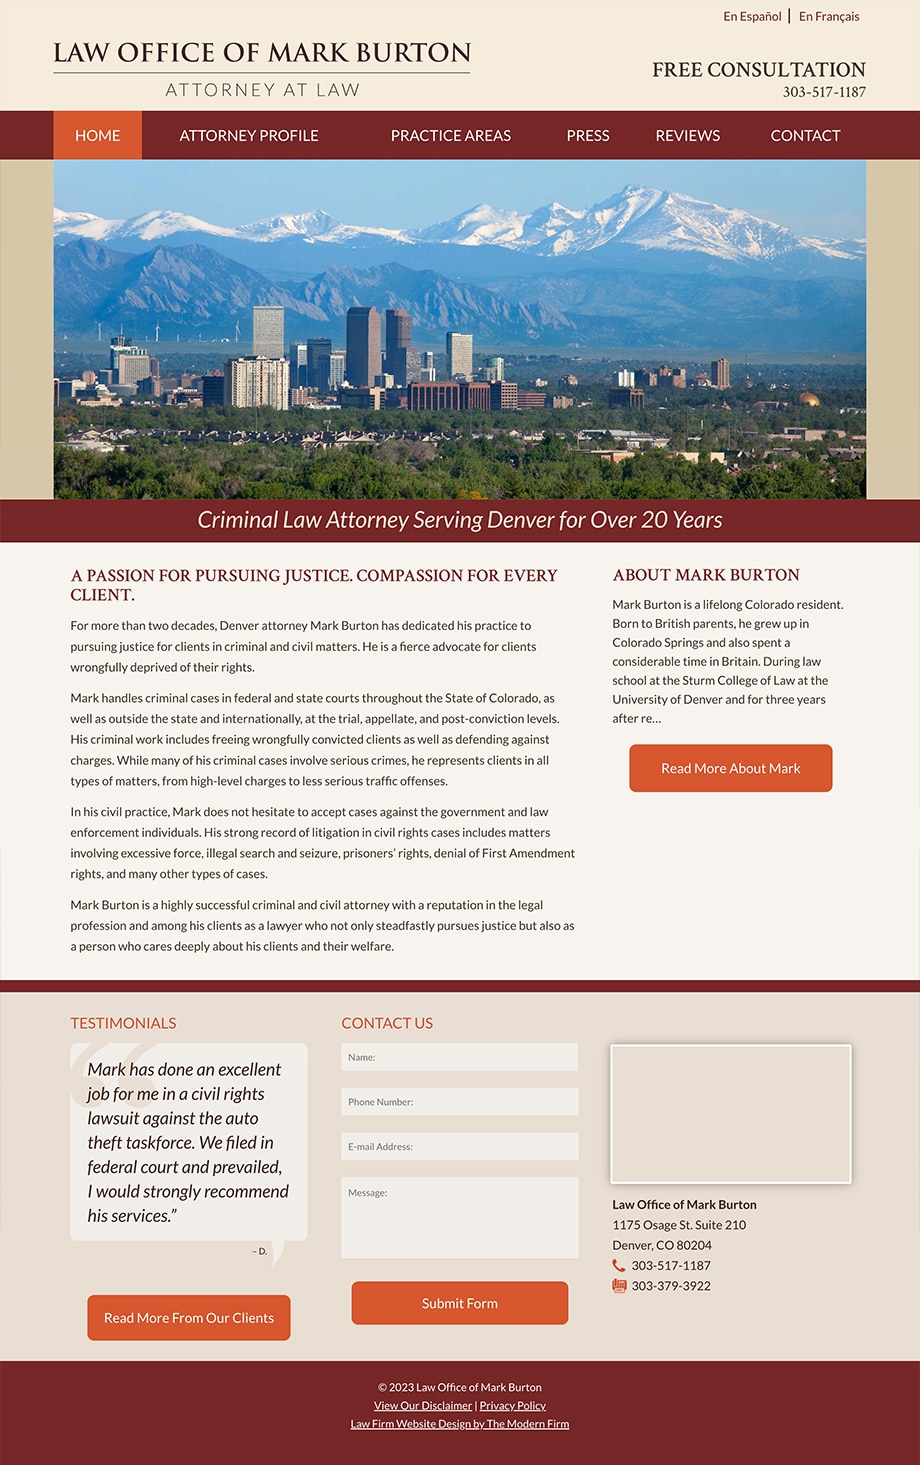 Law Firm Website Design for Law Office of Mark Burton